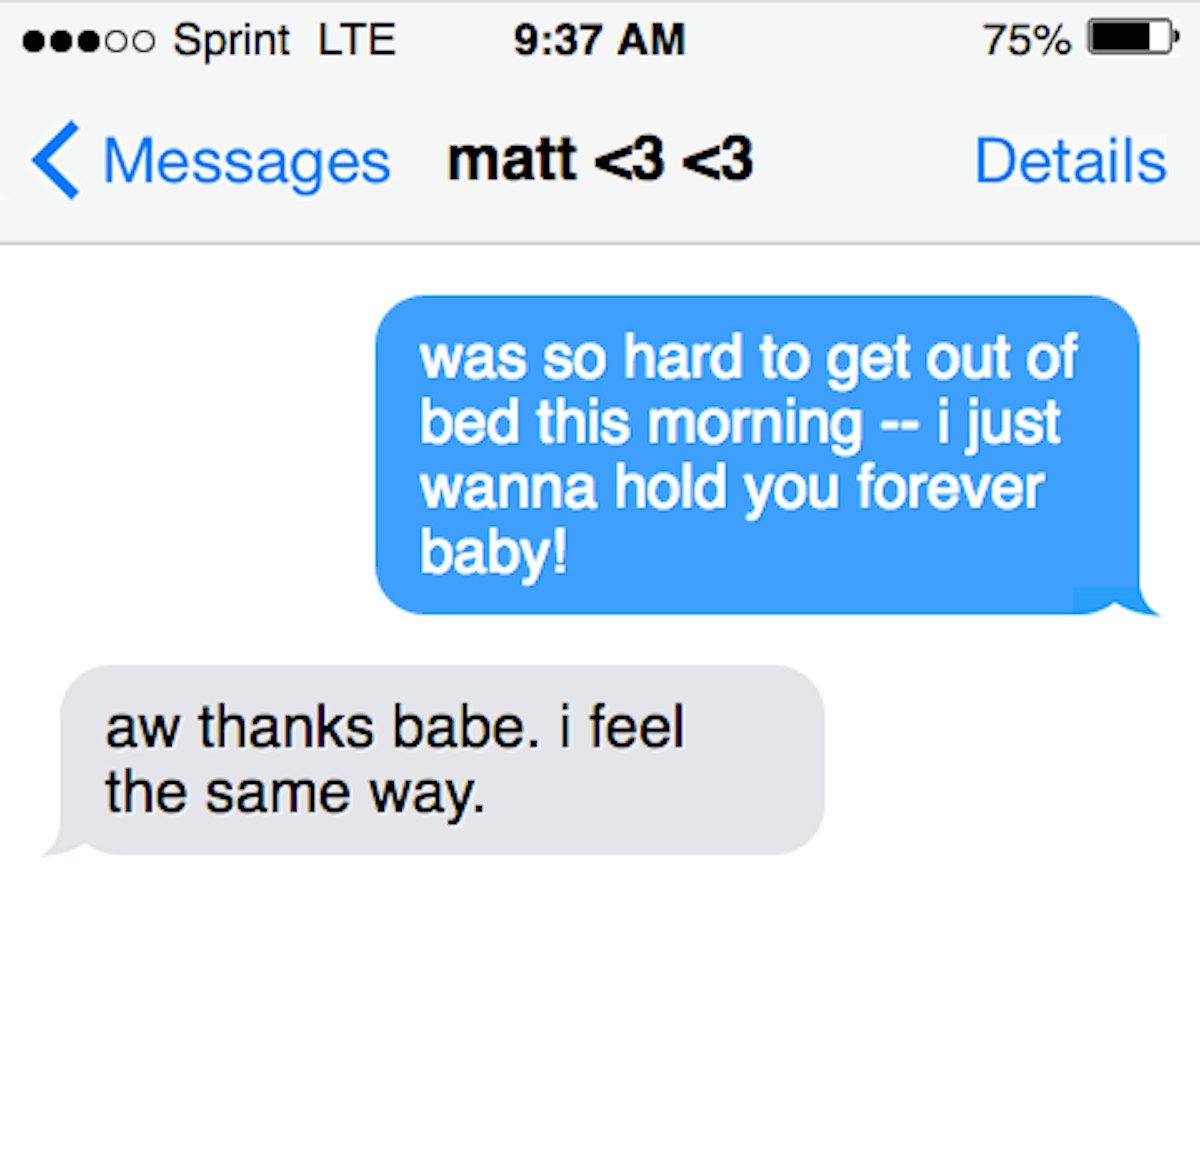 10 Romantic Texts To Send Your Partner Just To Say I Love You